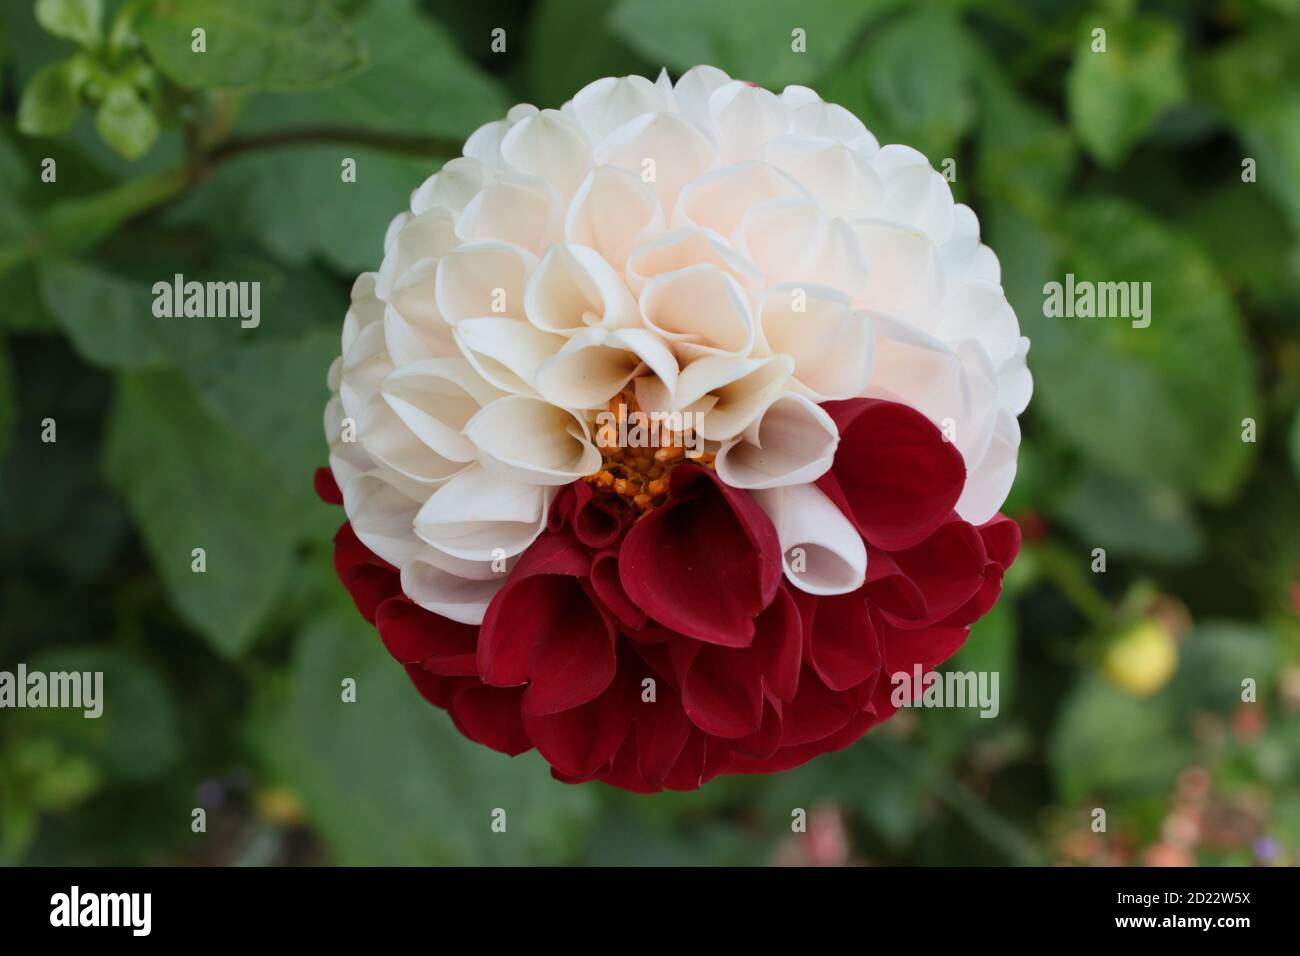 Close up stunningly beautiful dahlia red white colour, sharp contrast the single multi petal organic flower in full bloom in English country garden Stock Photo